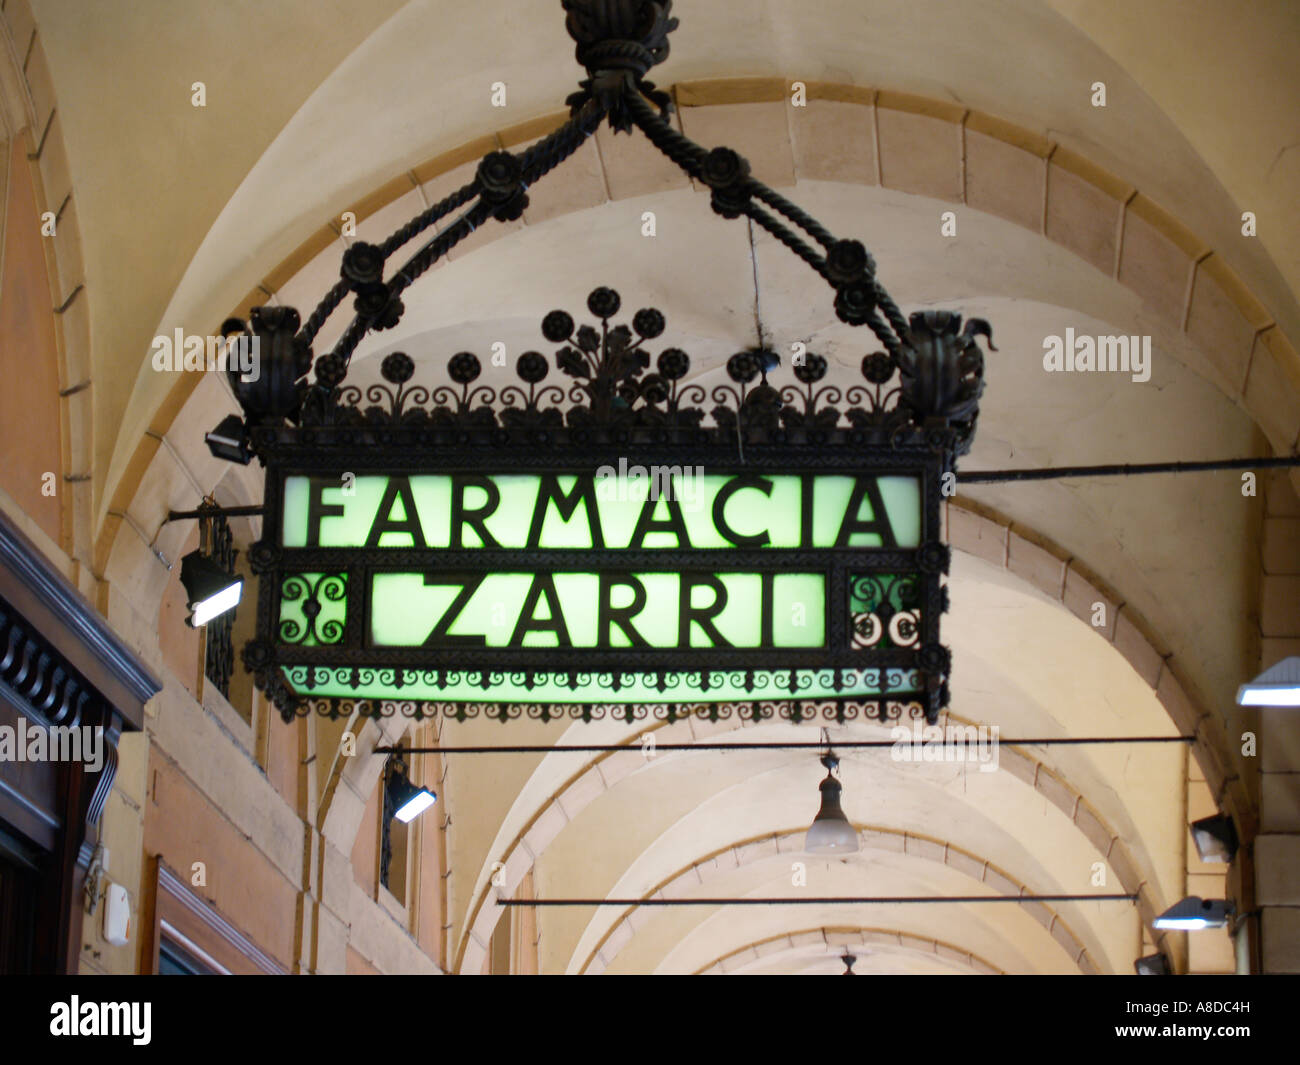 Sign of the Farmacia Zarri in the Aemilia Ars style inspired by the arts and crafts movement of William Morris. Stock Photo